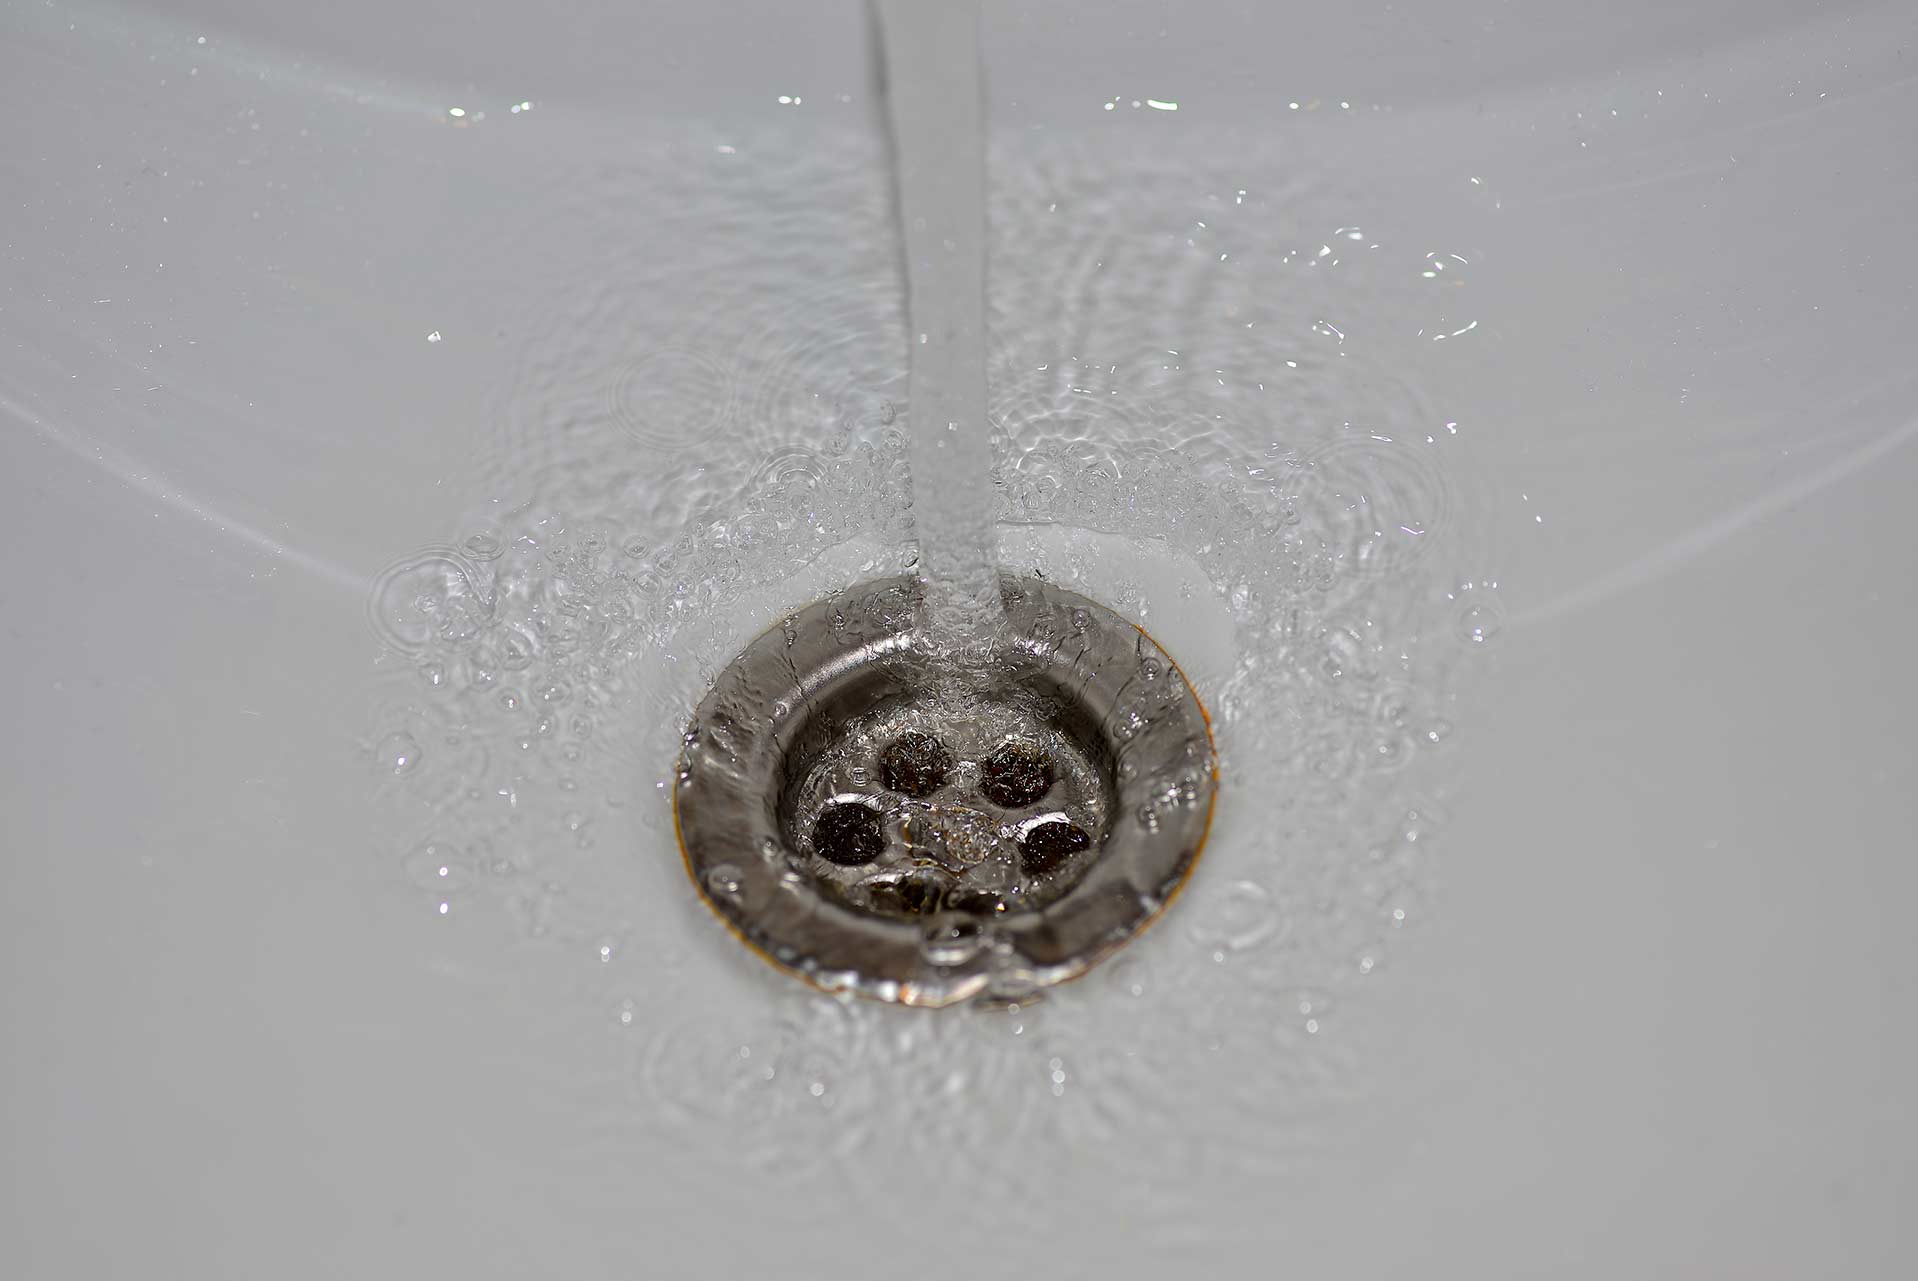 A2B Drains provides services to unblock blocked sinks and drains for properties in Swindon.